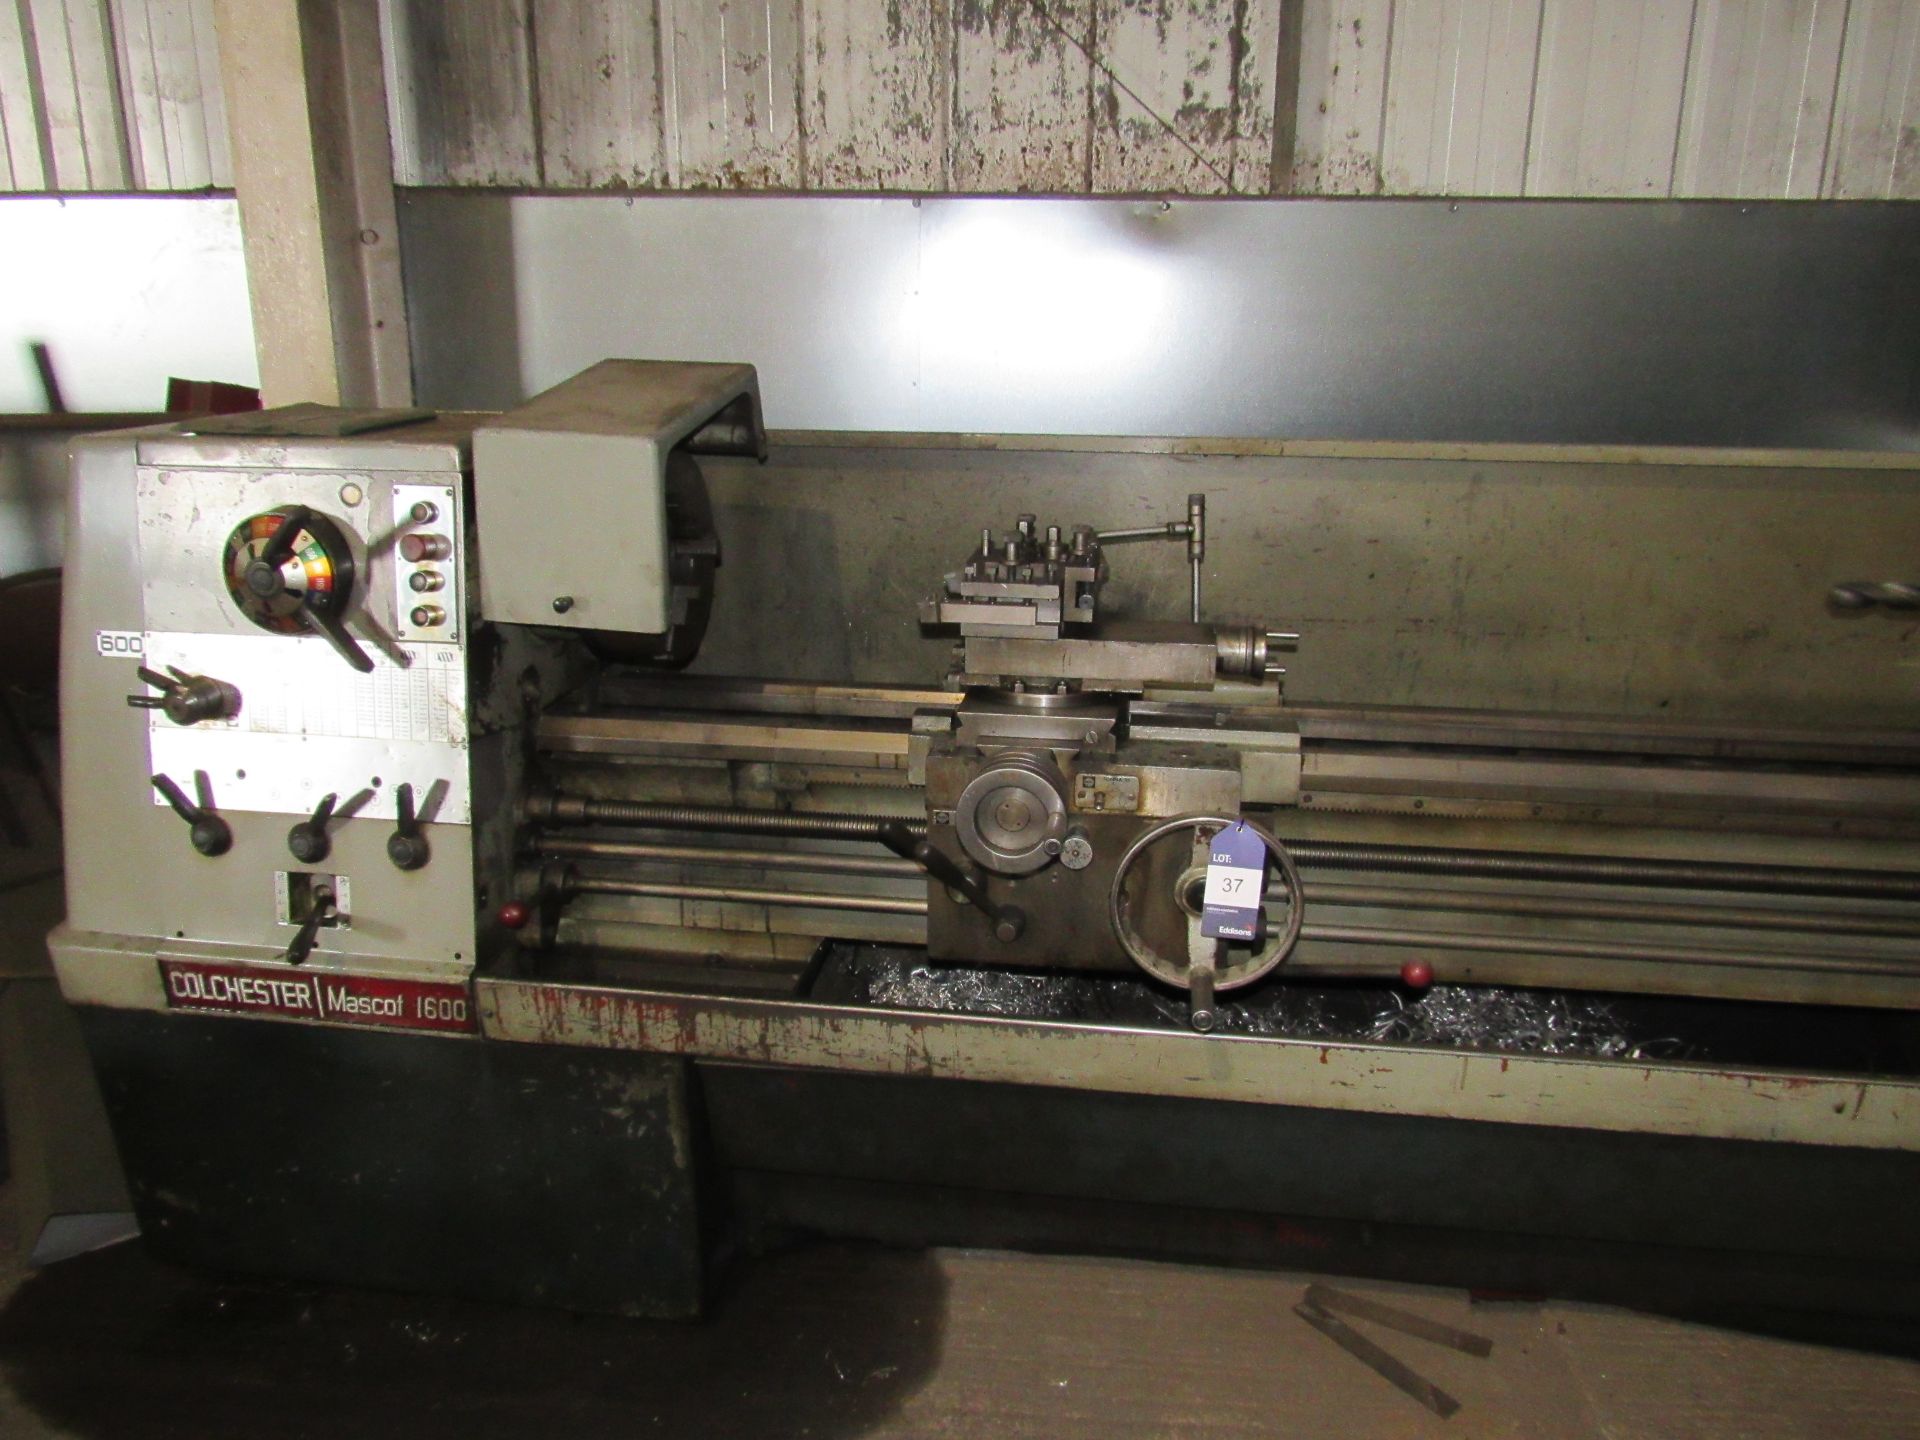 Colchester Mascot 1600 lathe Used Colchester mascot 1600 lathe, comes with 3 and 4 jaw chuck and - Image 3 of 5